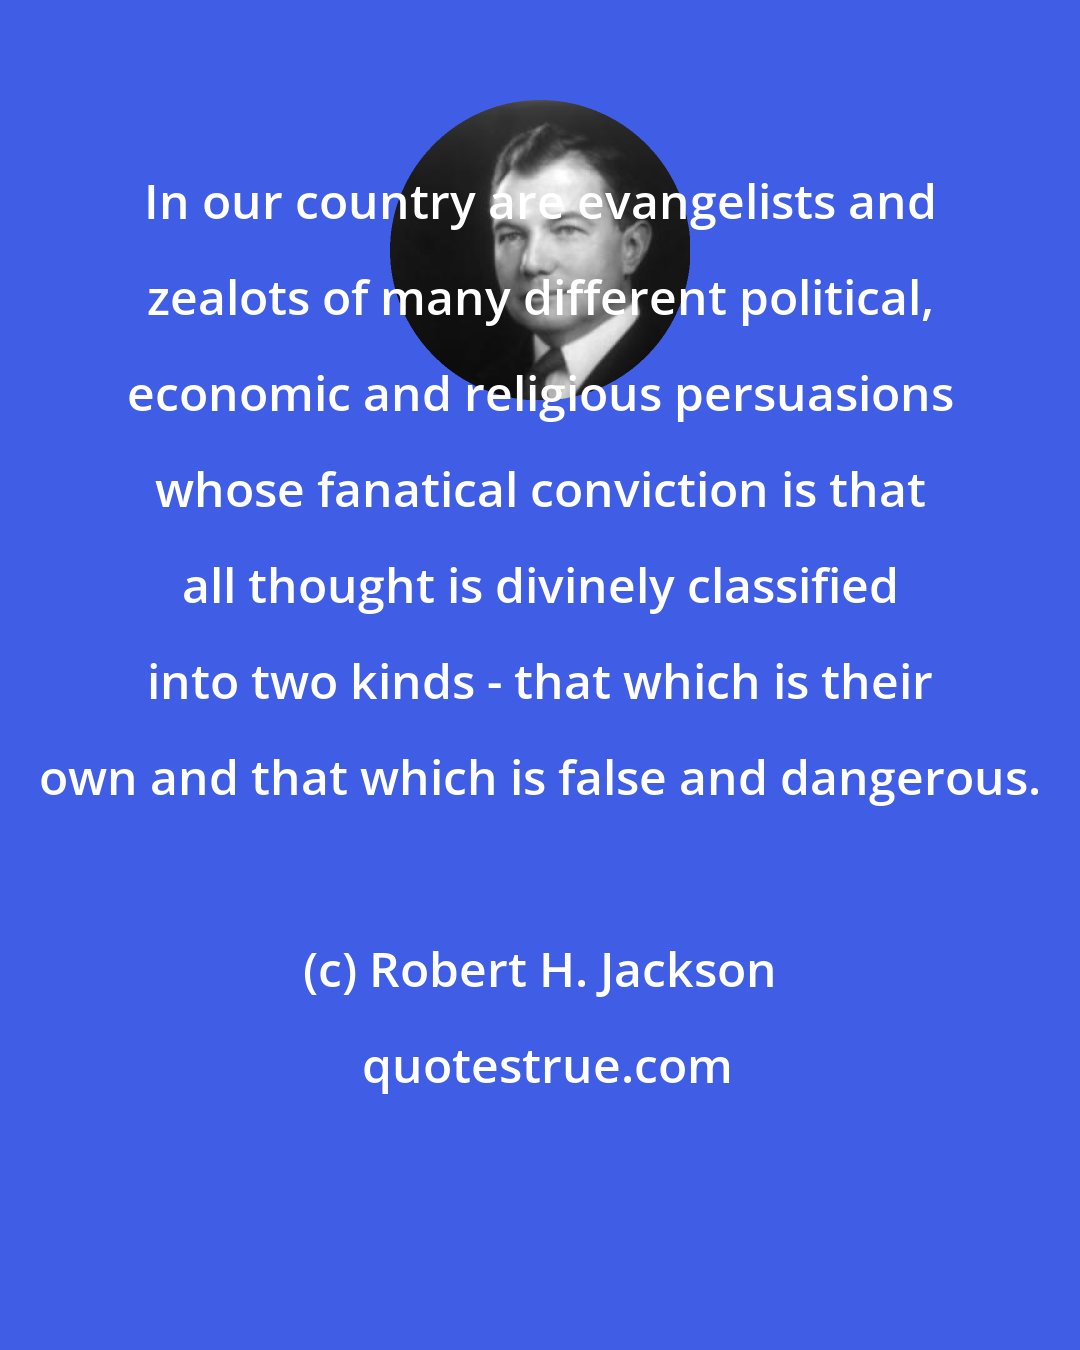 Robert H. Jackson: In our country are evangelists and zealots of many different political, economic and religious persuasions whose fanatical conviction is that all thought is divinely classified into two kinds - that which is their own and that which is false and dangerous.